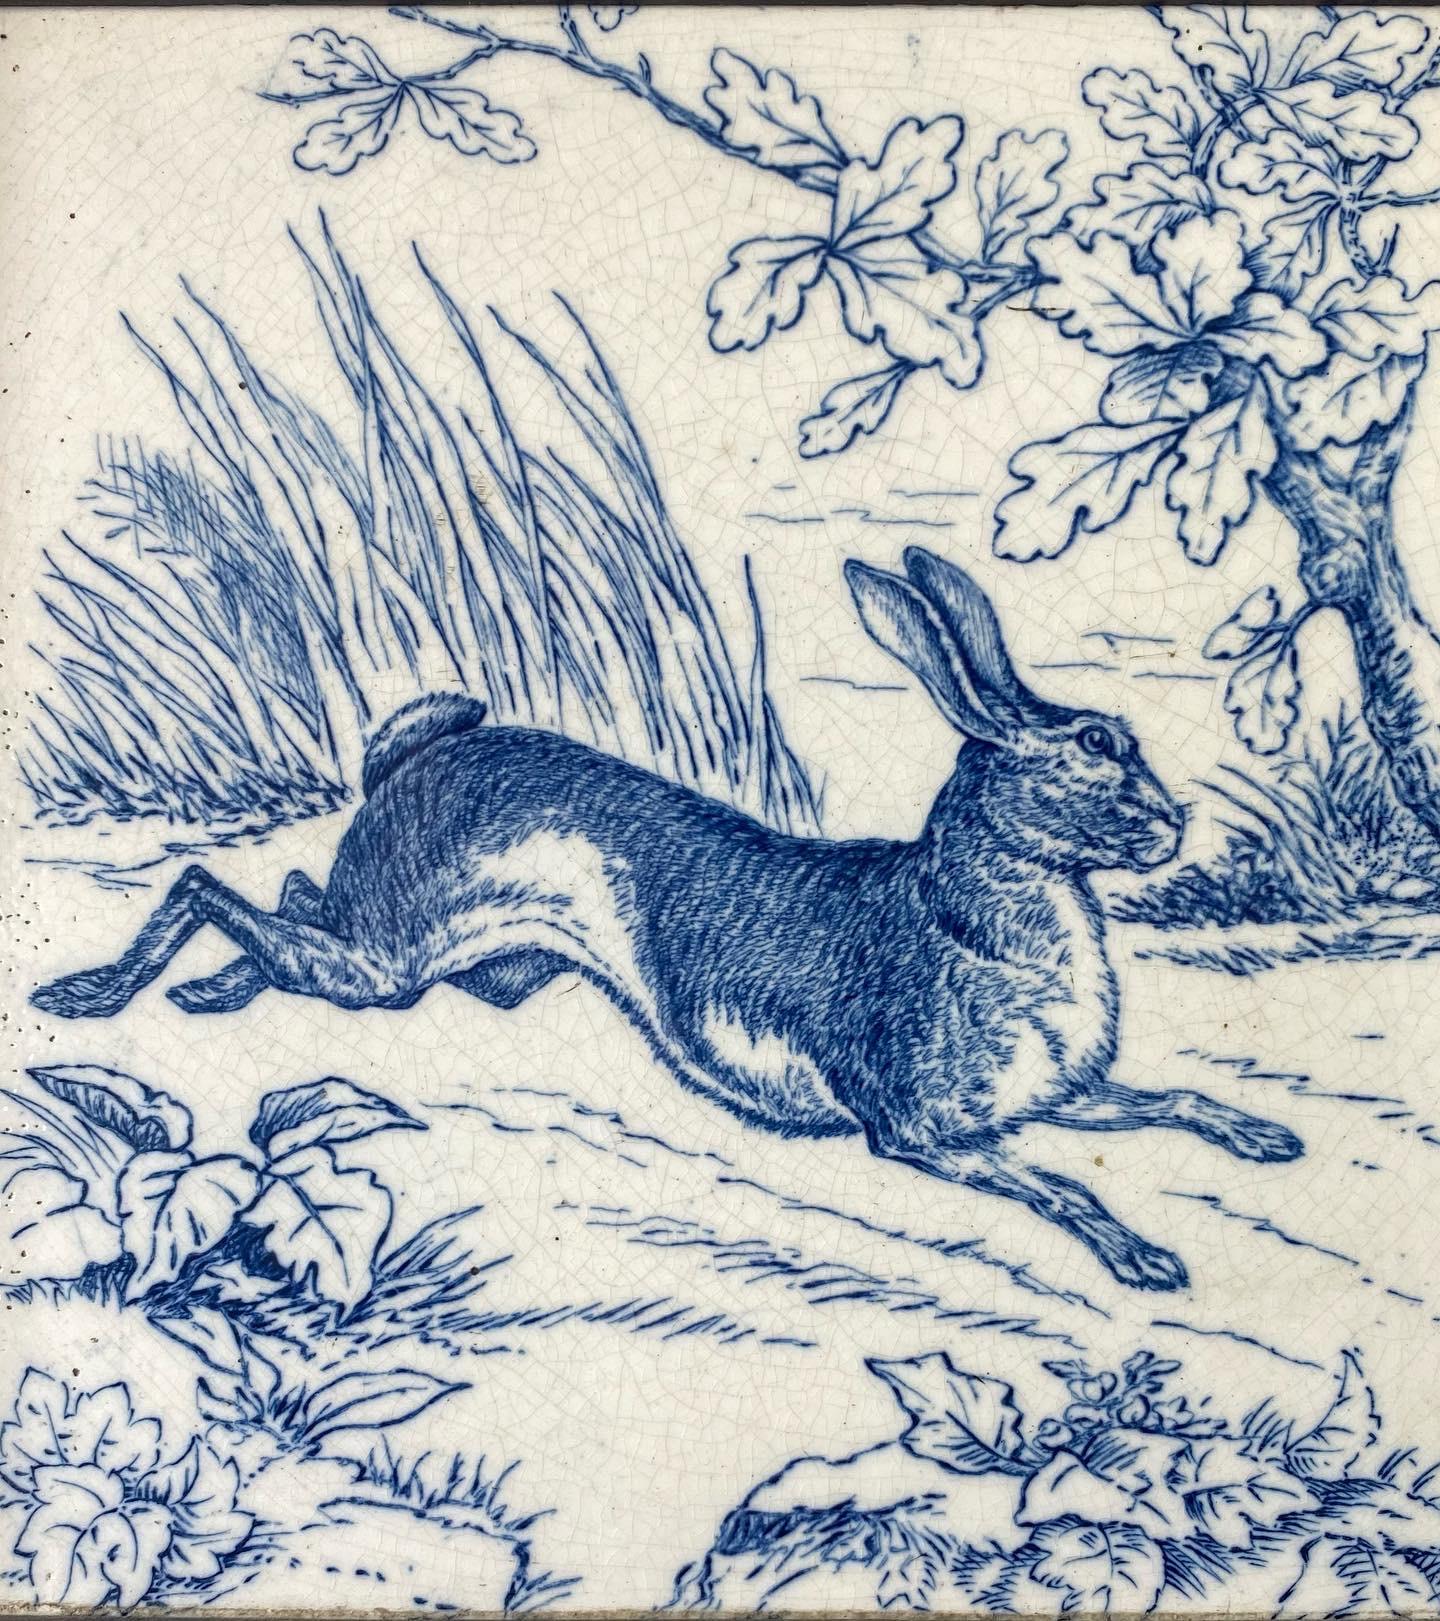 Wedgwood pottery Hunting tile, c. 1875. Printed in underglaze blue, with a scene of a Hare running through a field.
Framed in original oak frame.
Marked to the reverse ‘JOSIAH WEDGWOOD & SONS, ETRURIA’
Dimensions of tile – 19 cm, 7 1/2”